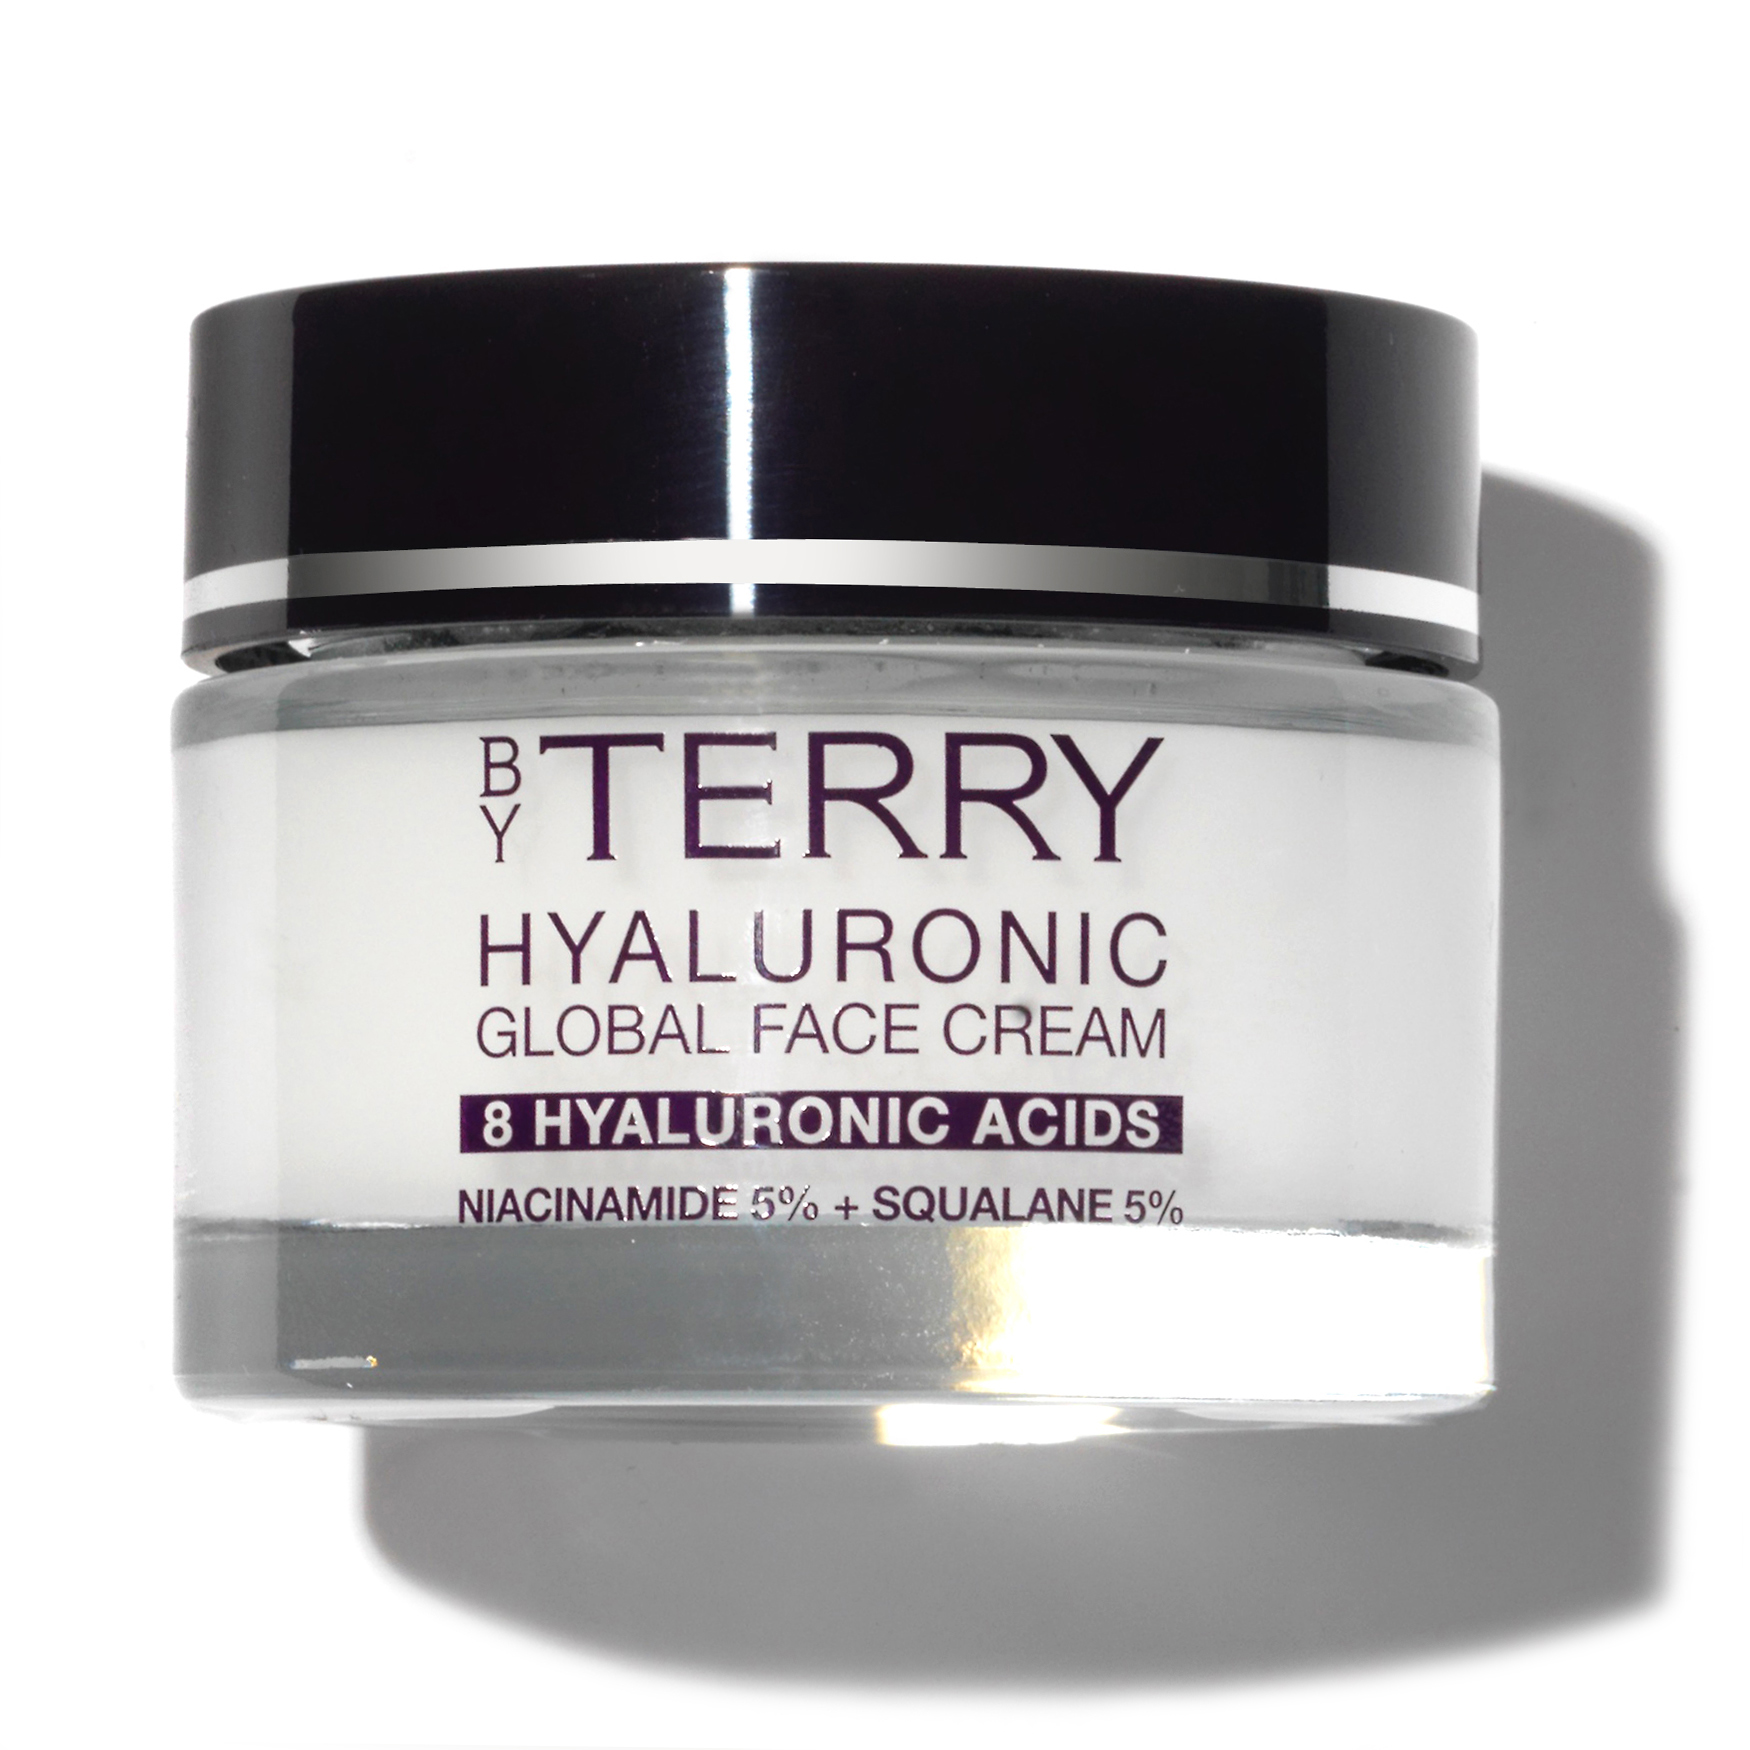 Global face. Крем Terry Hyaluronic Global. Hyaluronic acid face Cream. F.A.C.E. Hyaluronic acid 2%. F.A.C.E. Hyaluronic acid 1%.